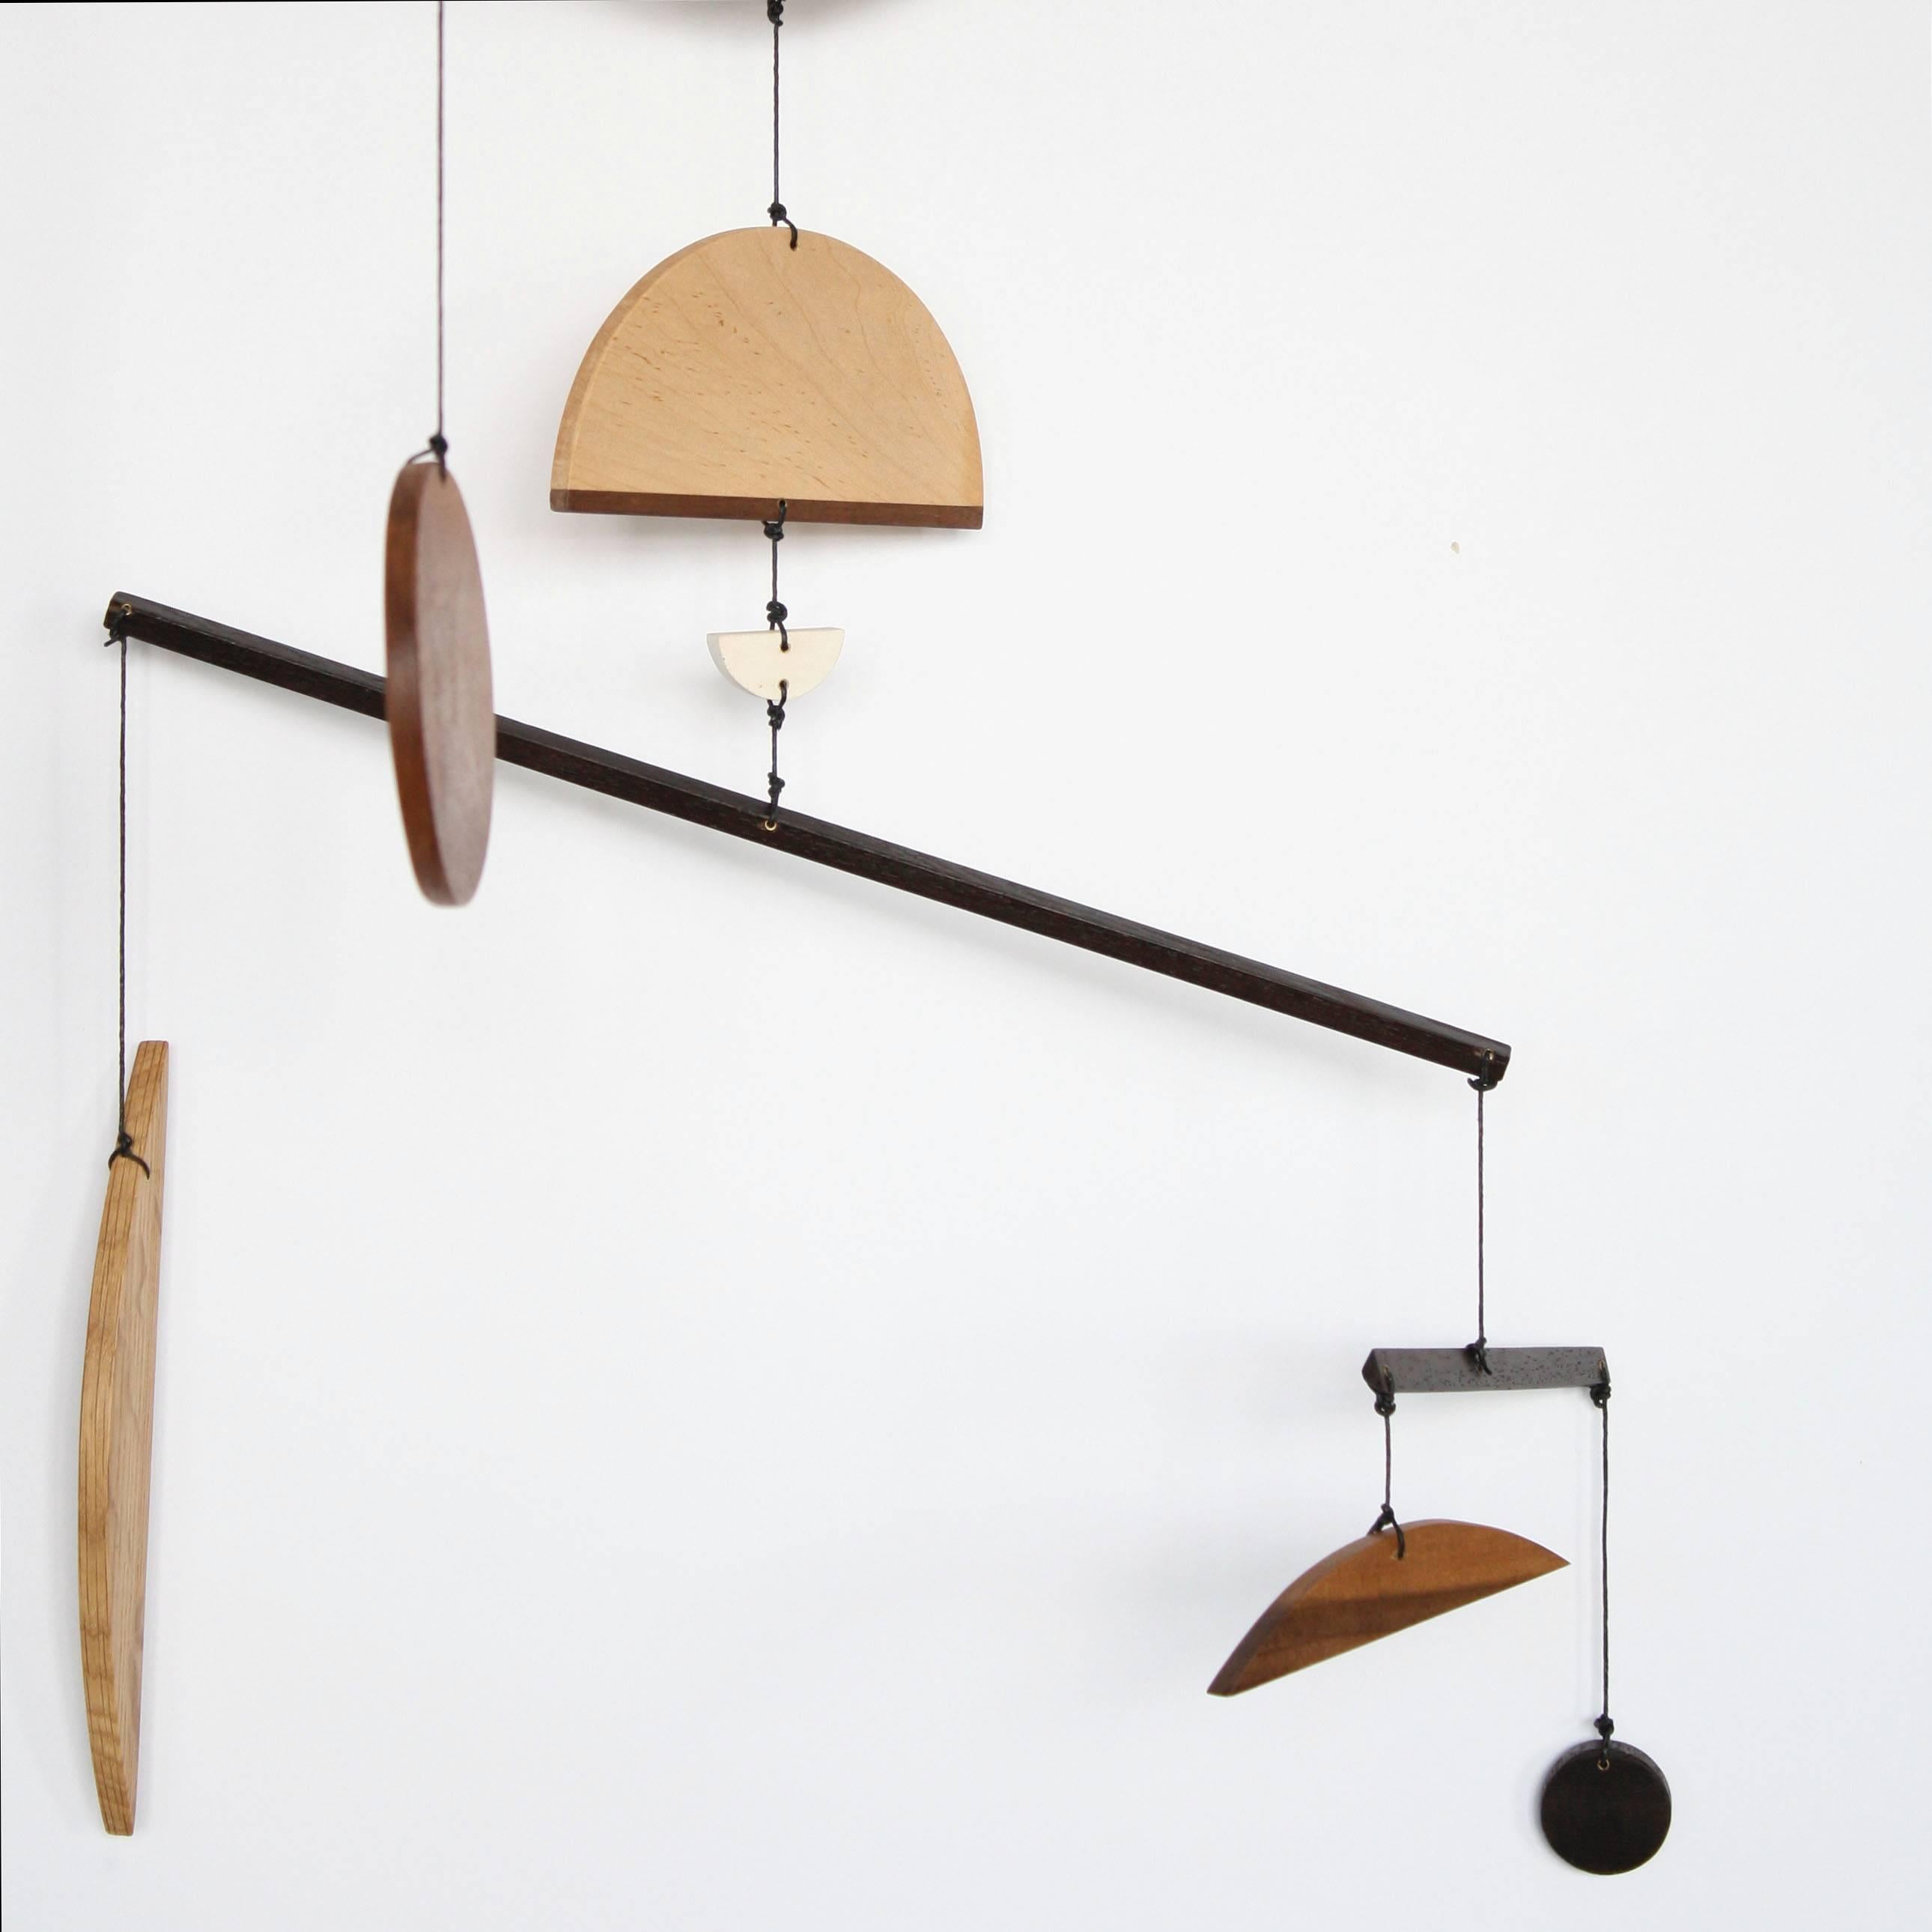 Fort Makers' Circle Two Mobile is made in Brooklyn by Noah Spencer. His wooden kinetic sculptures explore organic and linear form and touch upon a human fascination with the universe.

Materials: pine, white oak, maple, sapele, wenge, wax string